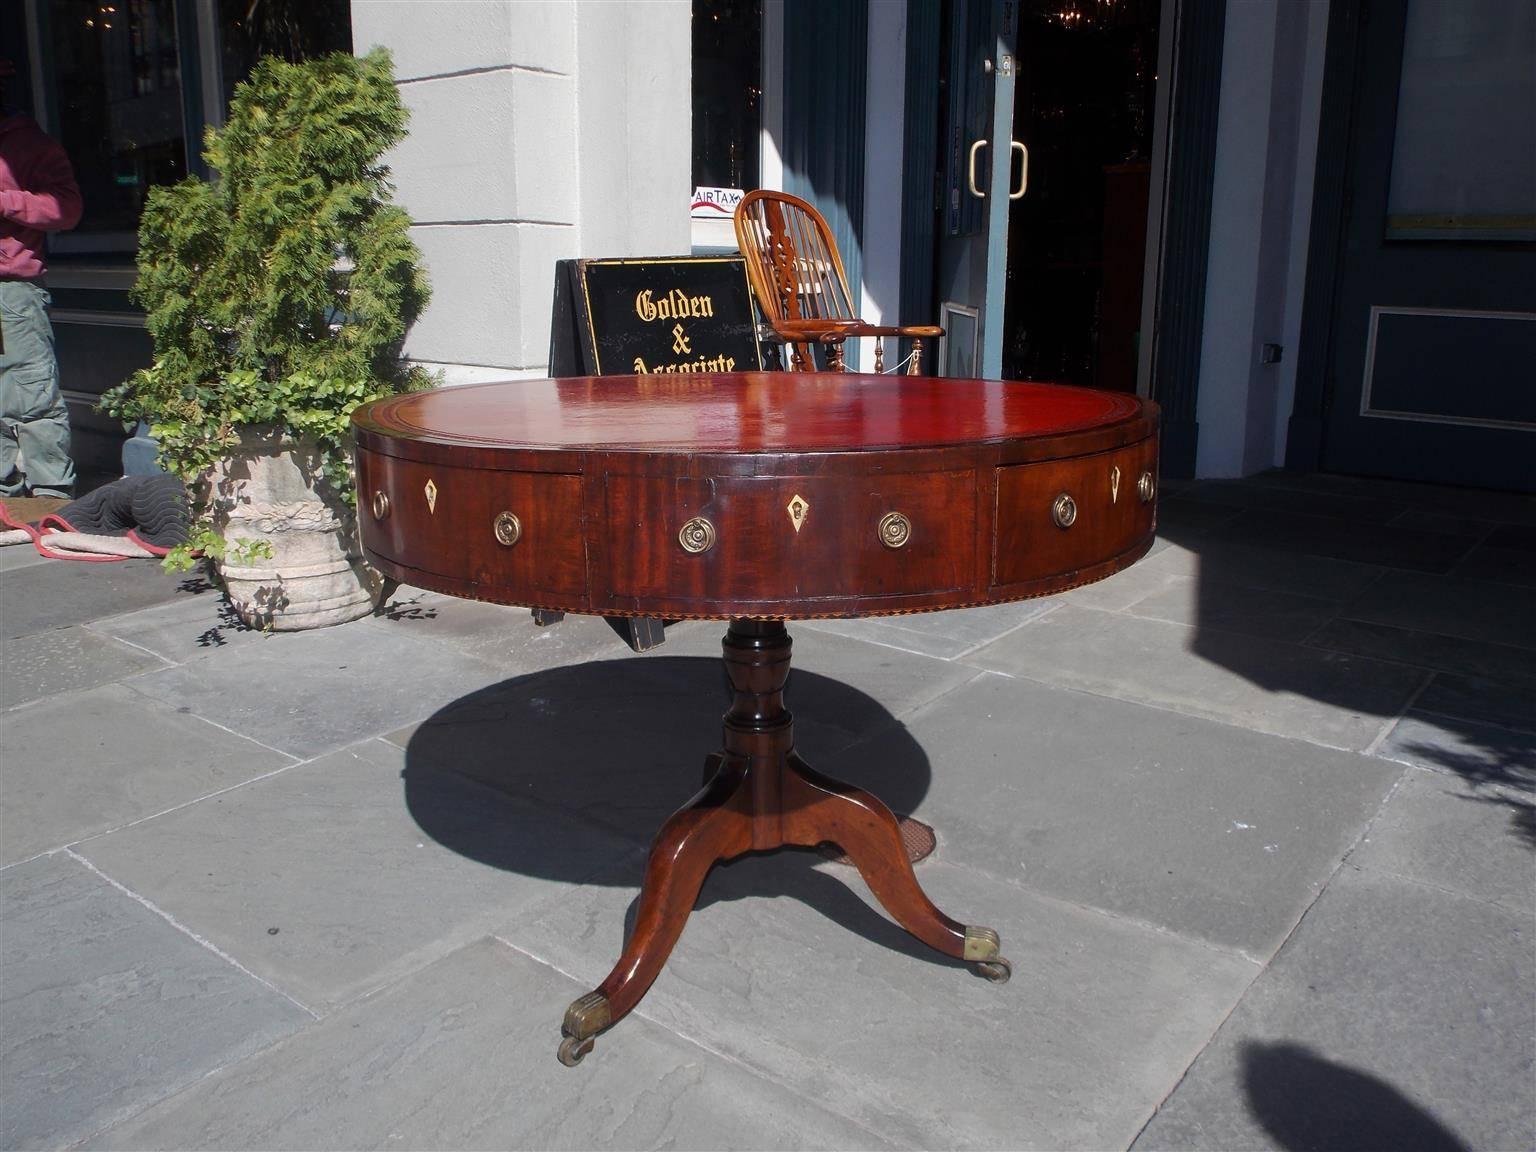 George III English Mahogany Inlaid Red Leather Top Rent Table with Original Casters, C 1790